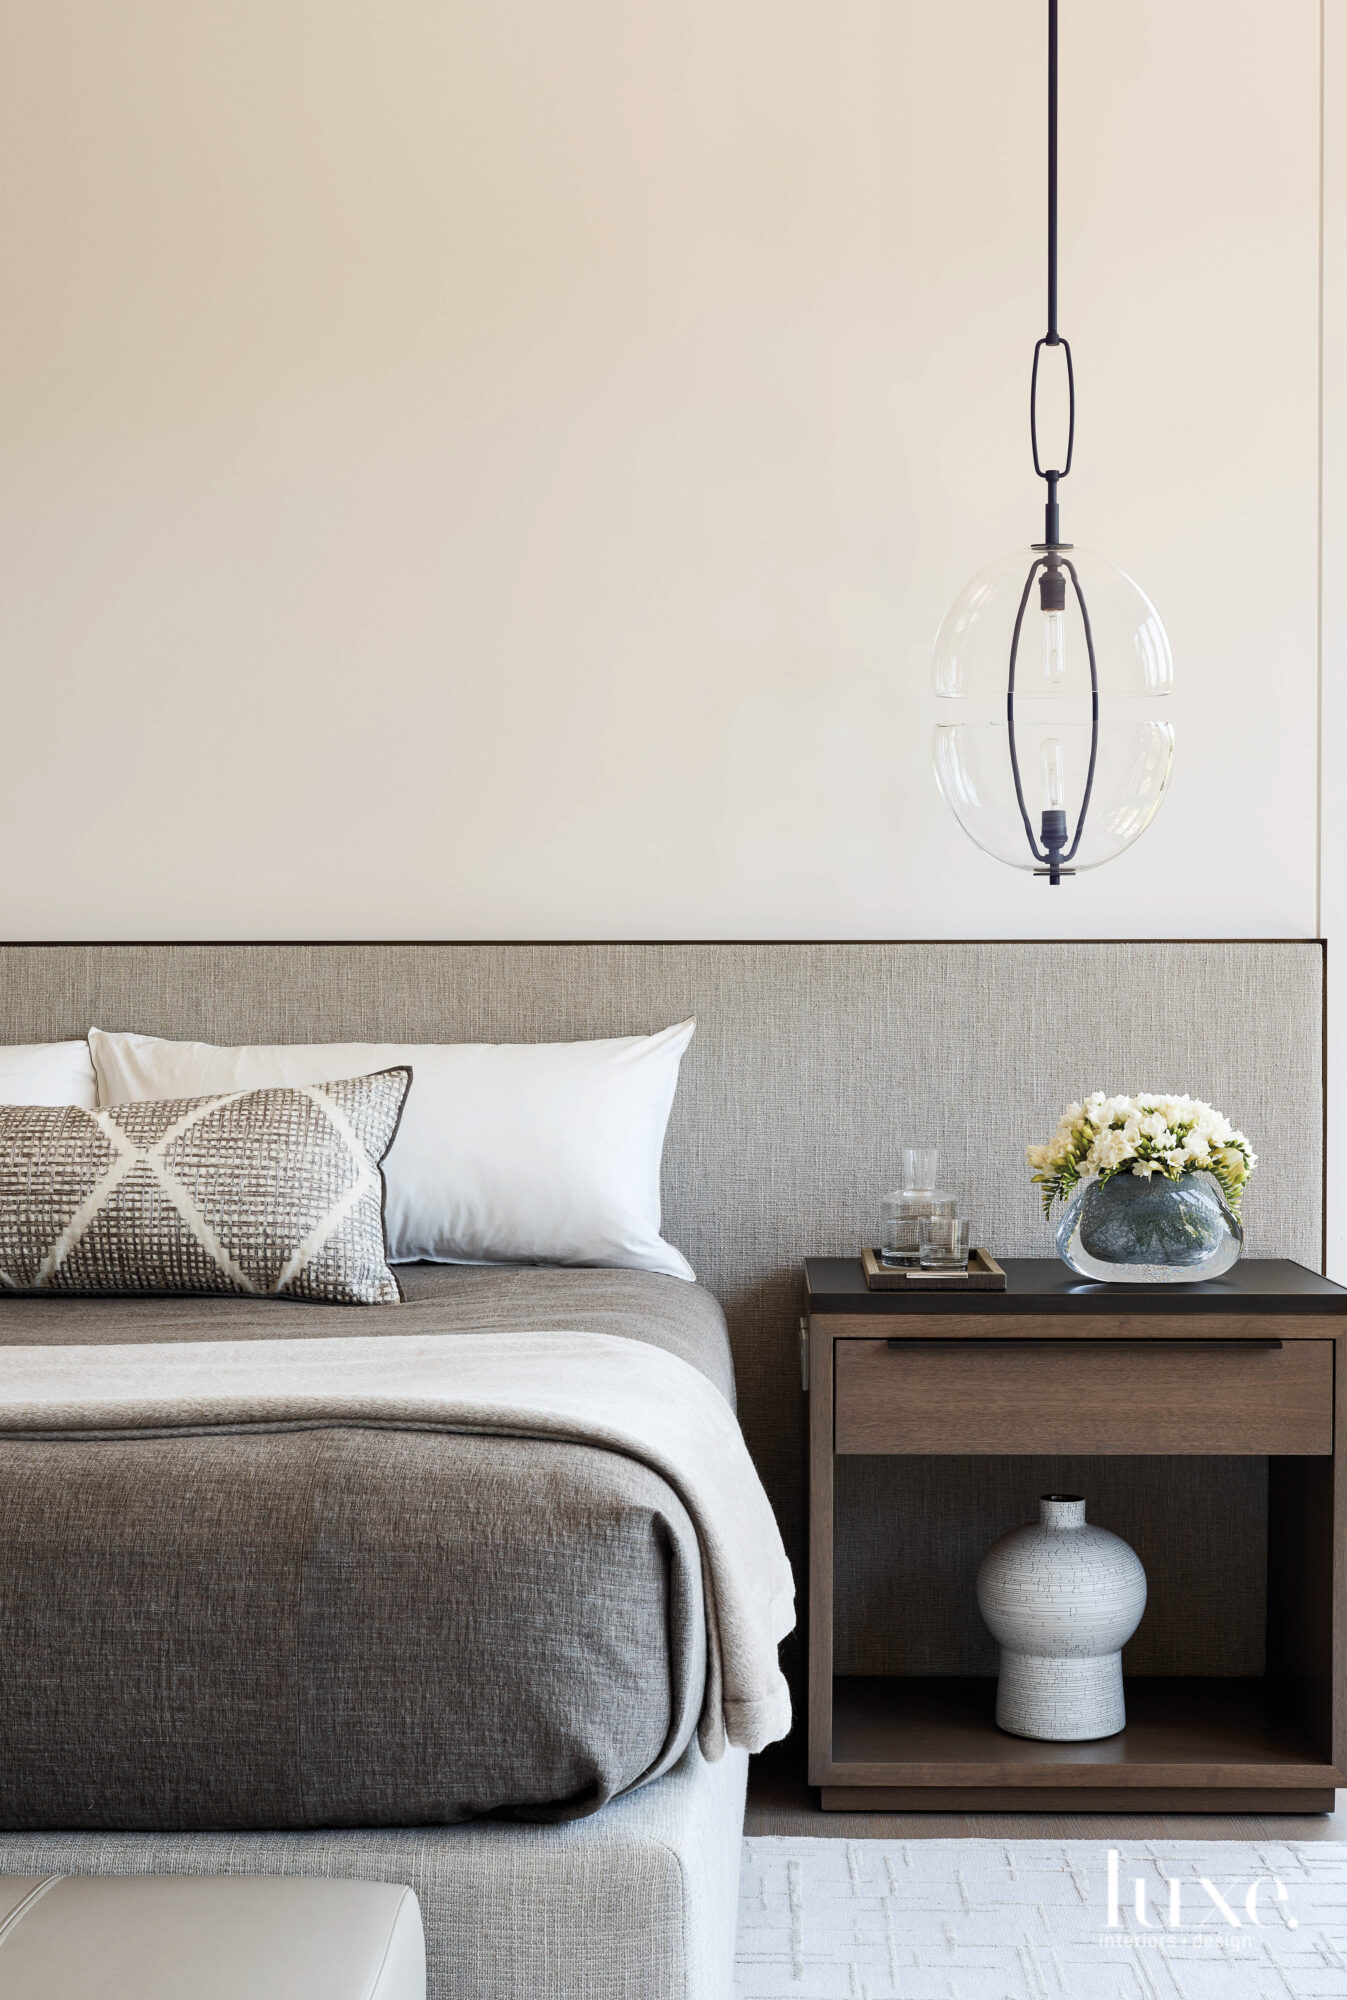 A bedroom has a long upholstered headboard and neutral linens.